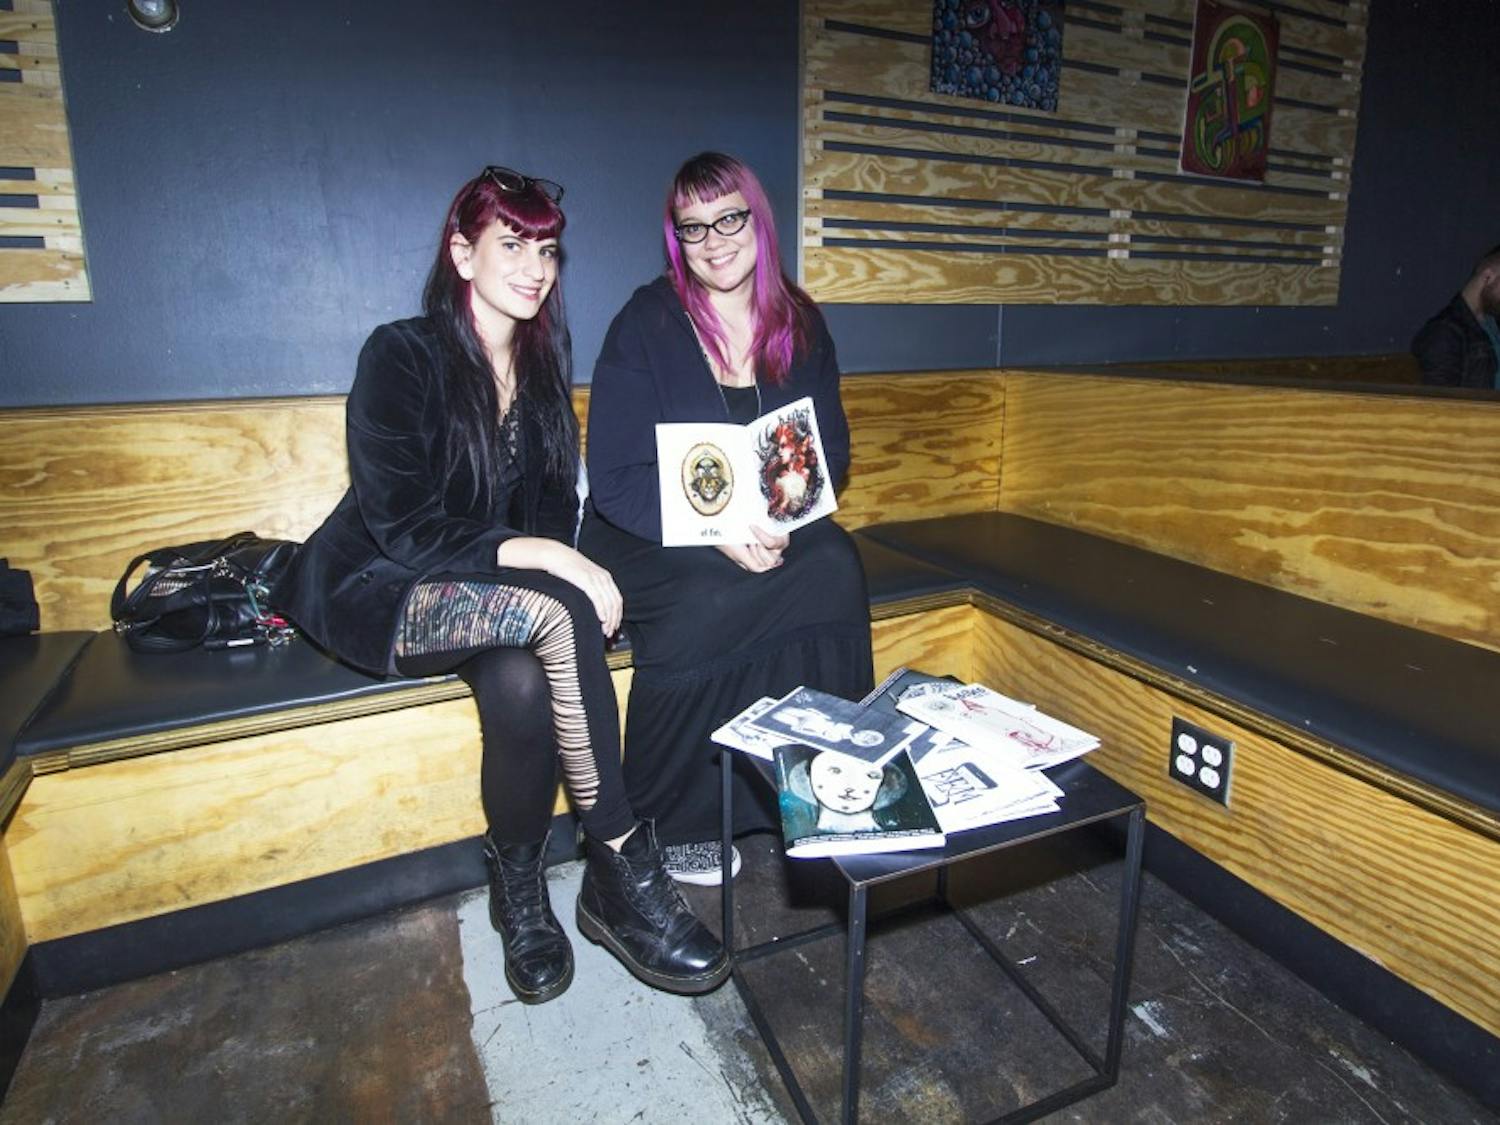 Charissa Lucille and Marna Kay owners of Wasted Ink Zine Distro pose for a photo on Nov 19, 2015 at Cartel Coffee in Tempe.